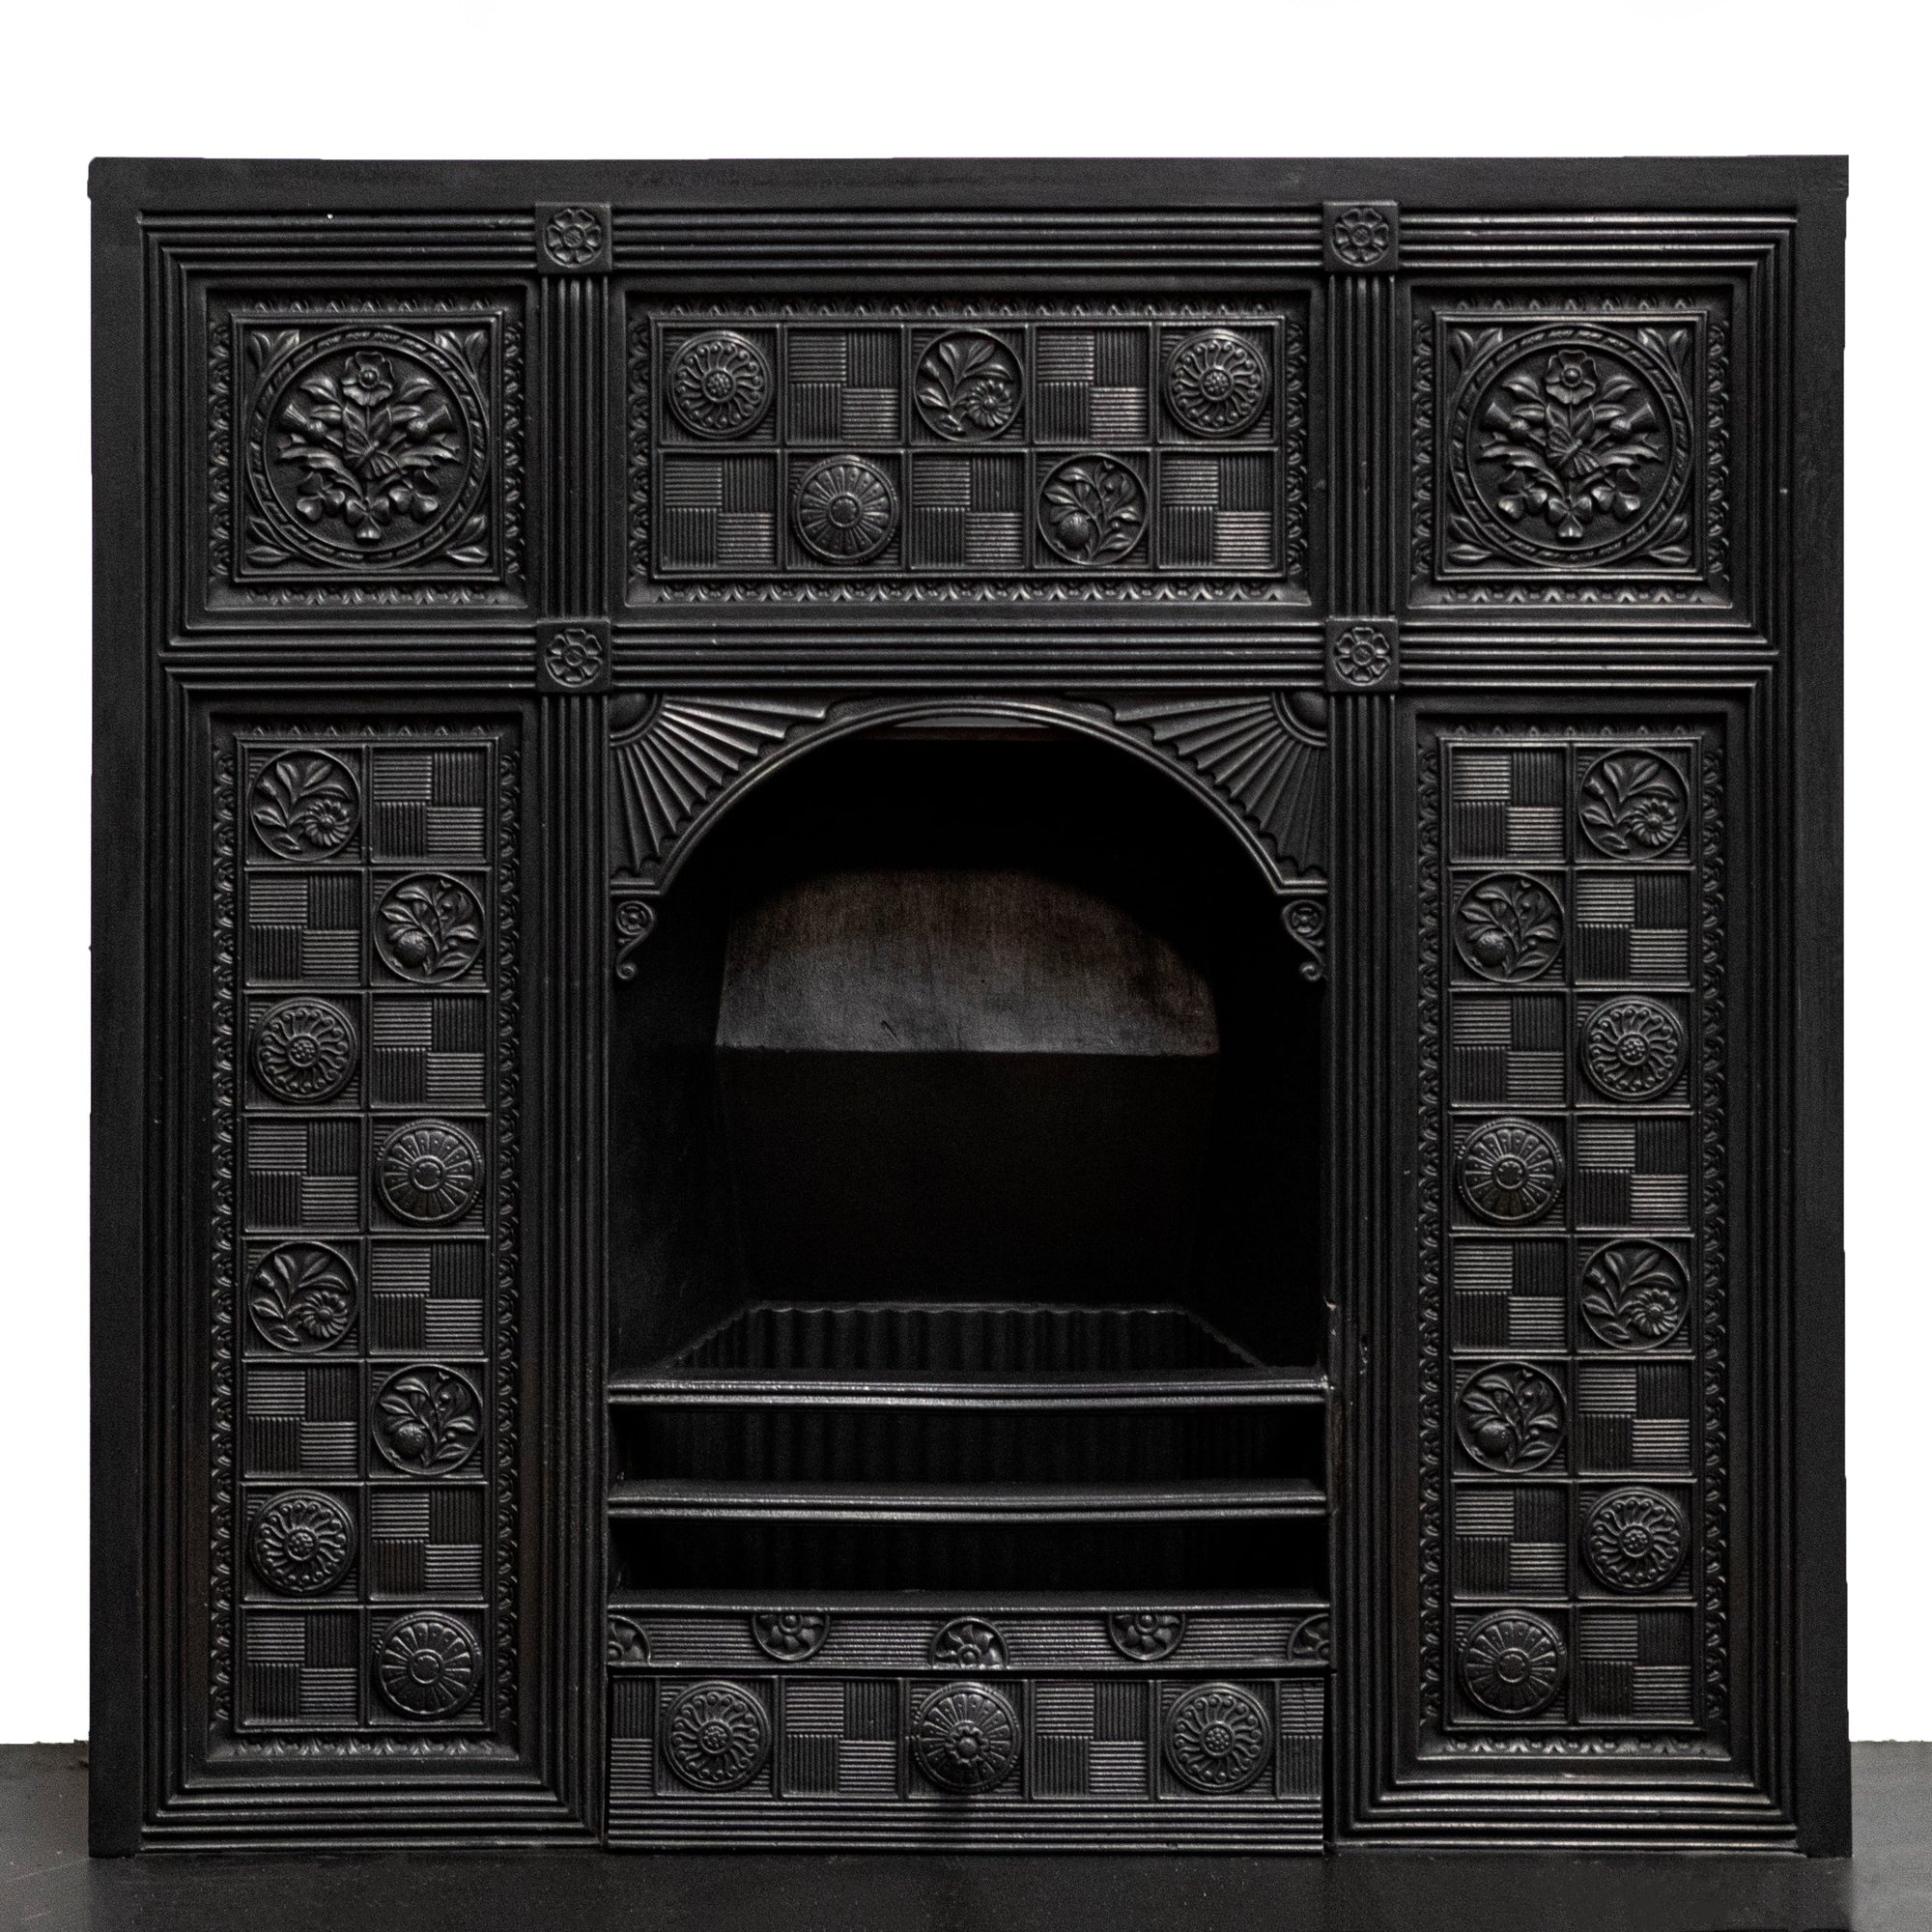 Rare Arts & Crafts Antique Cast Iron Fireplace Insert | The Architectural Forum